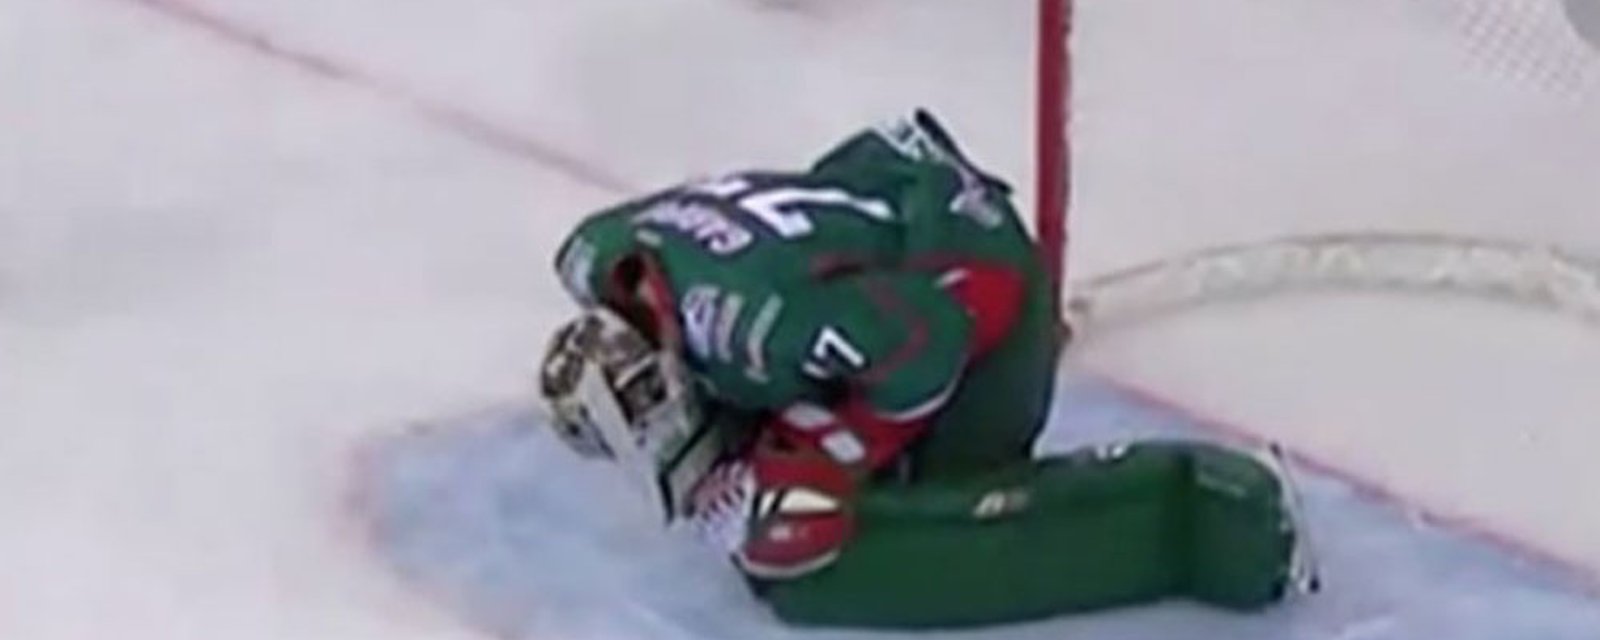 Must see: goalie gives up terrible goal!